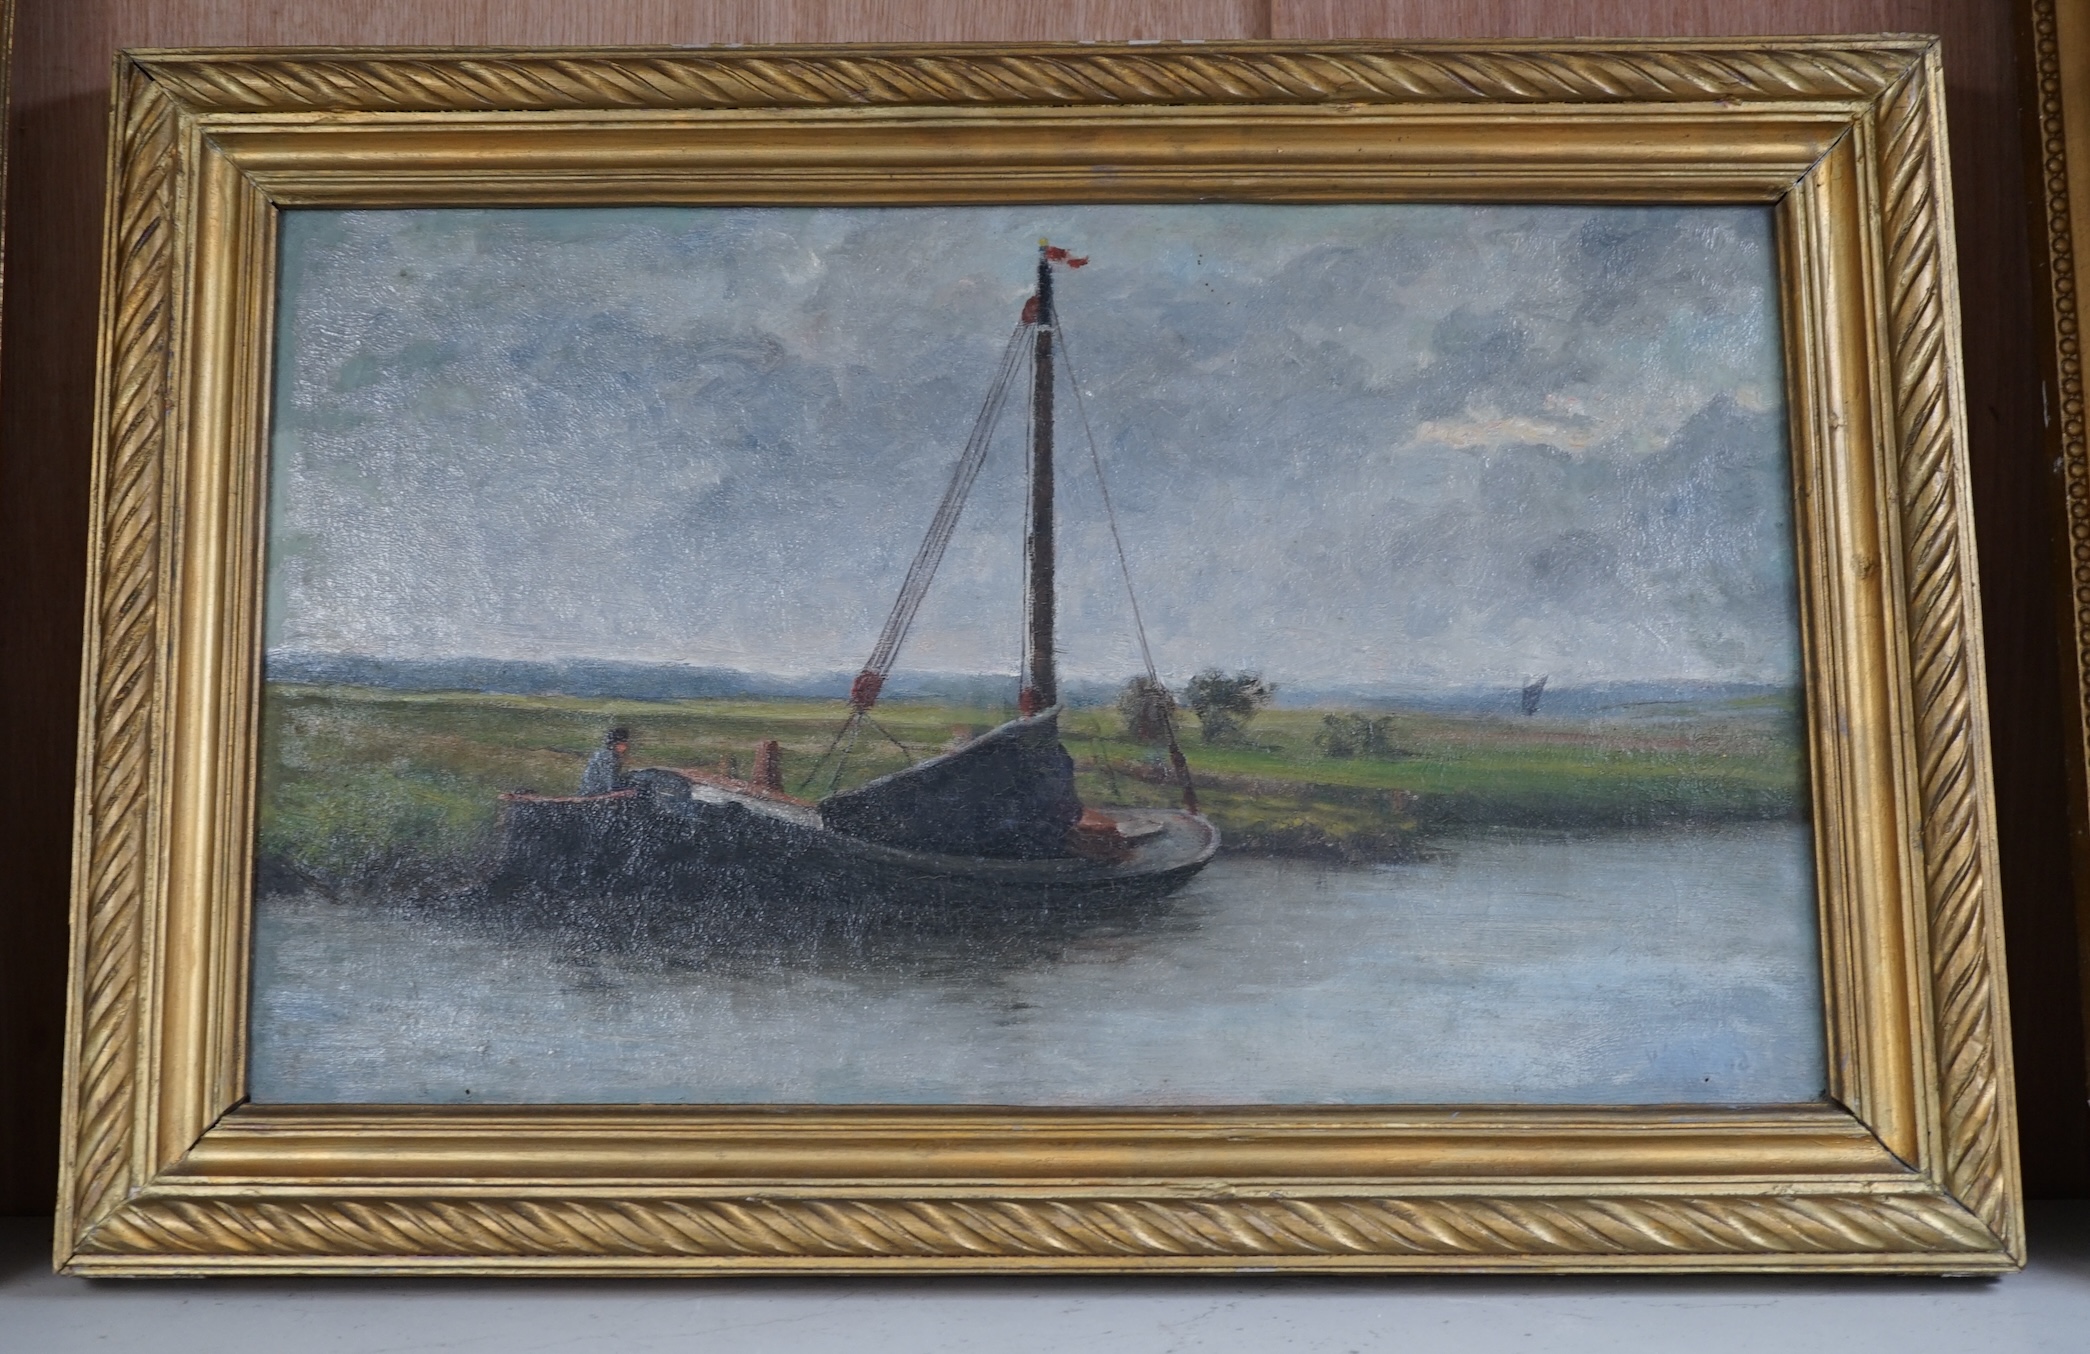 Late 19th century, Norfolk School, oil on canvas, Riverscape with barge, unsigned, 29.5 x 49cm, gilt framed. Condition - fair to good